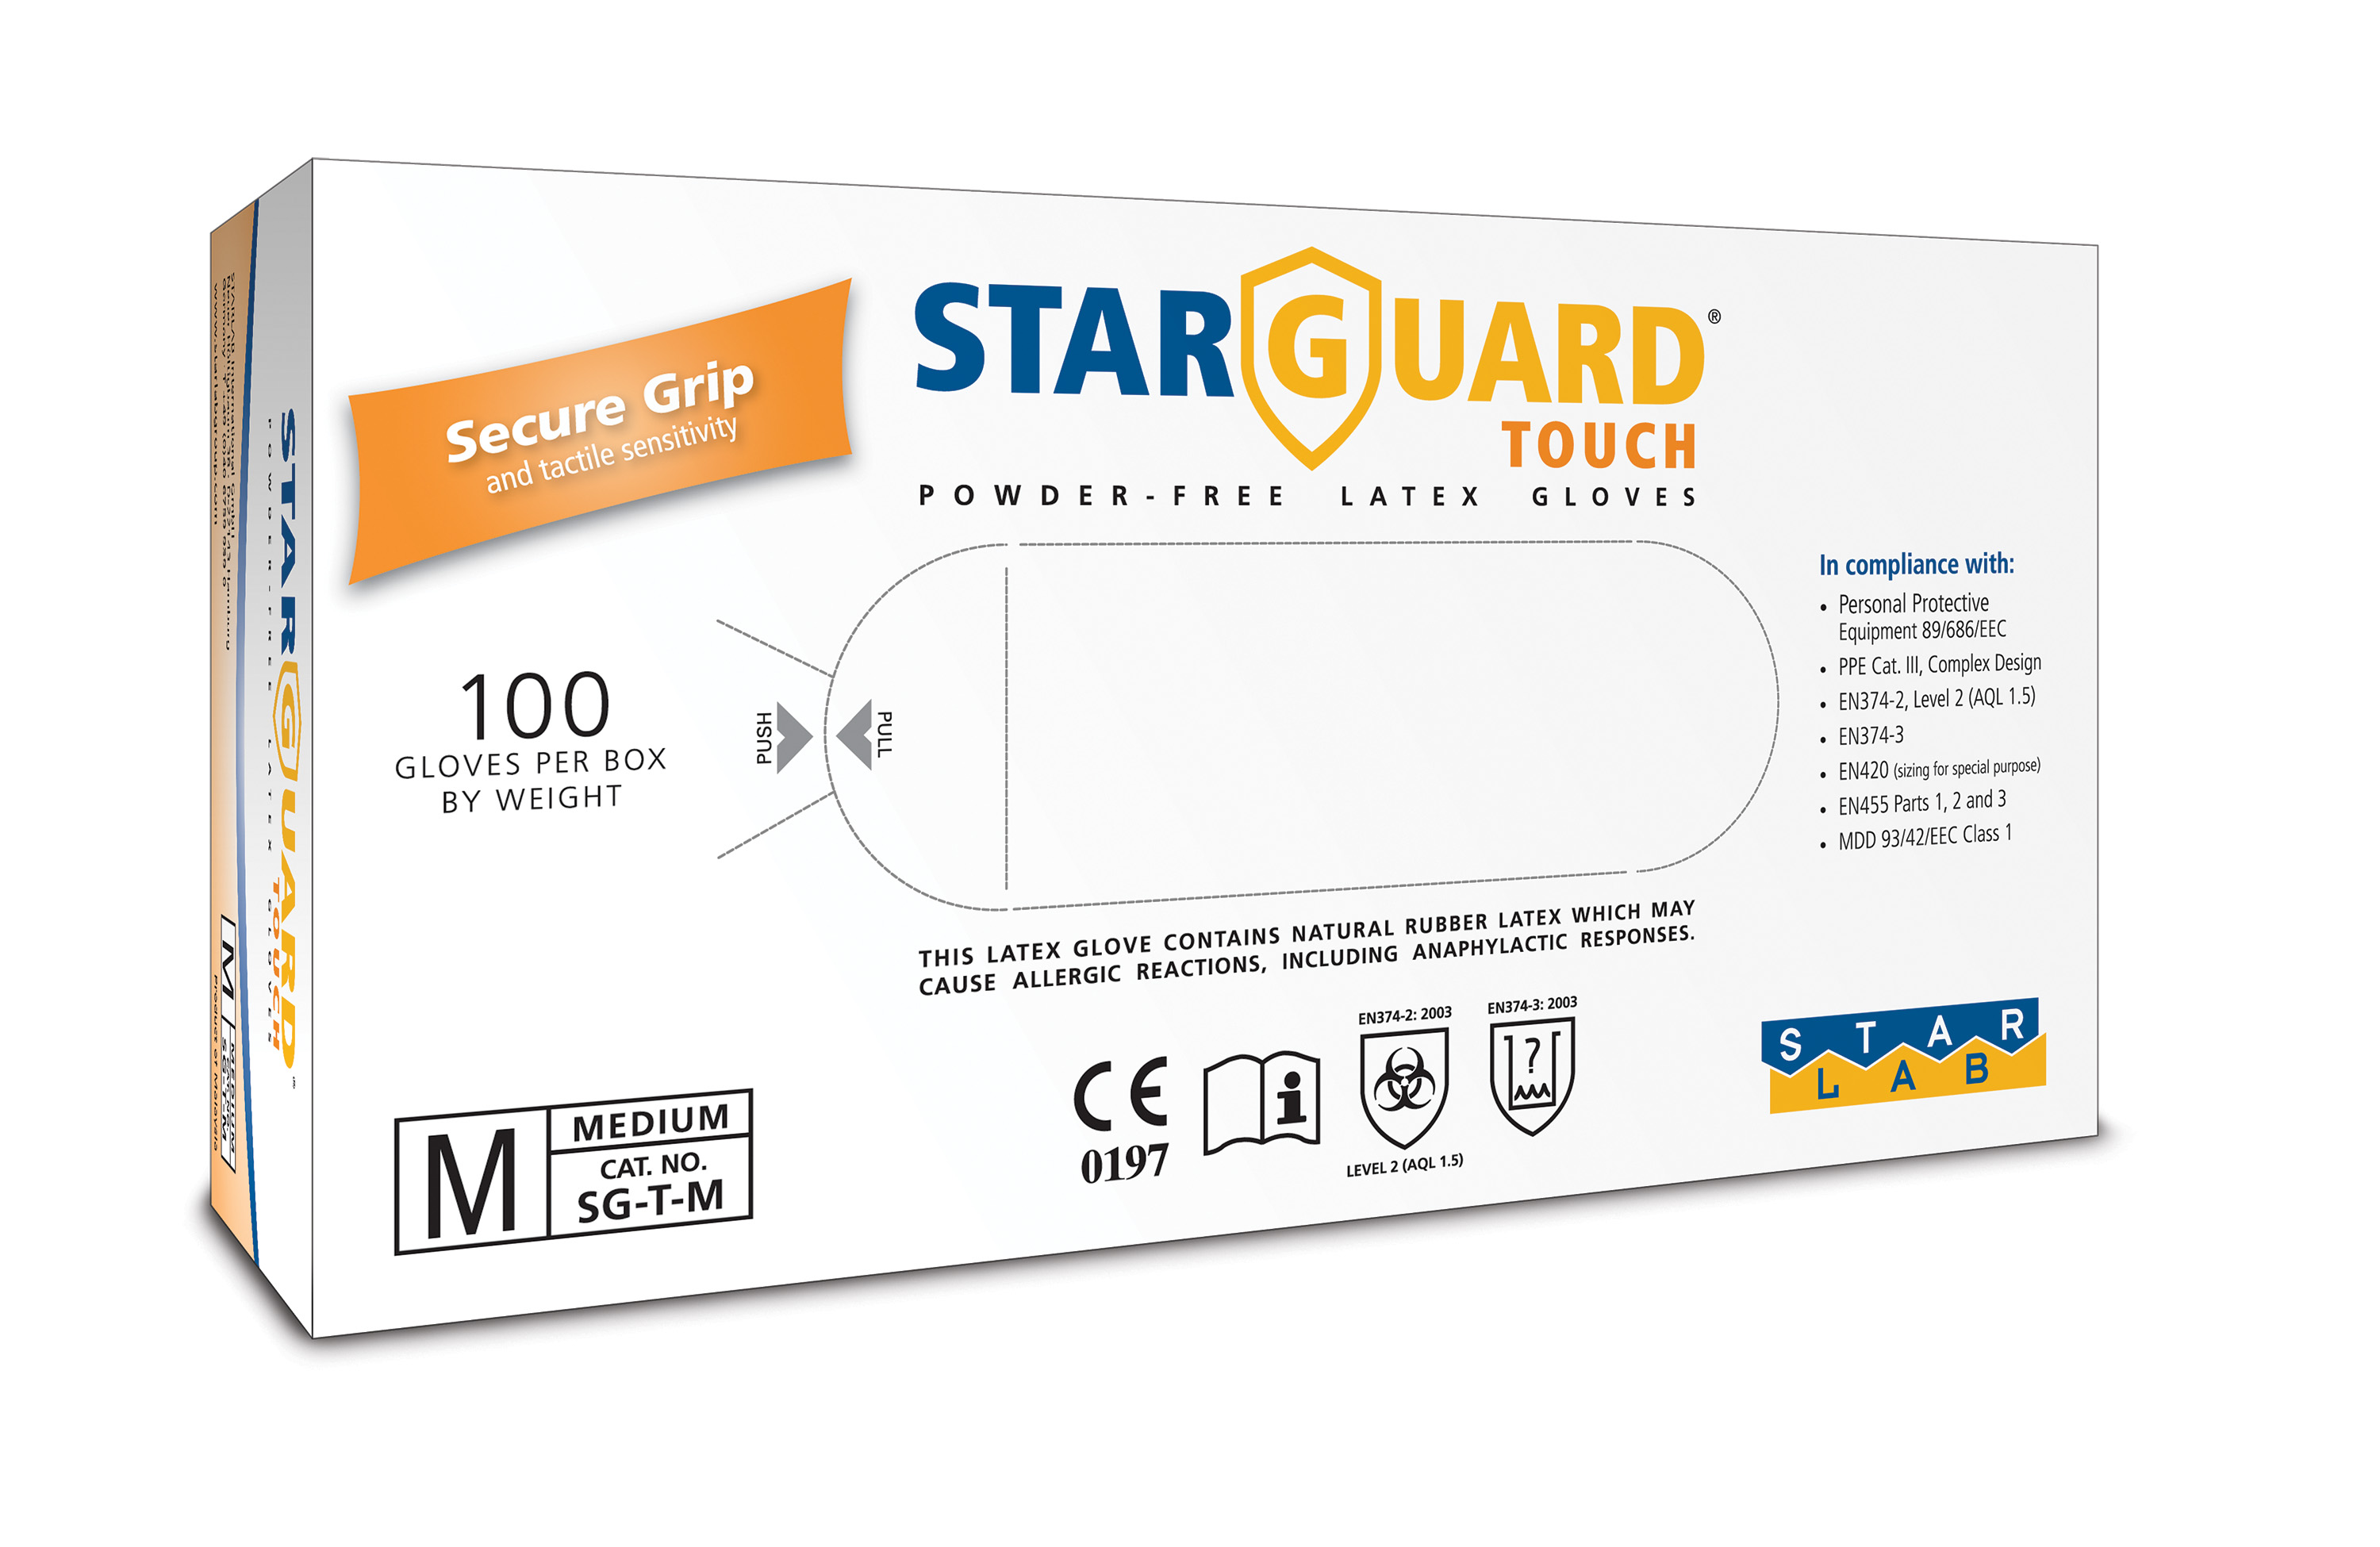  StarGuard TOUCH Latex Gloves, Powder Free, Natural, Size XL, Pk/ 10 x 100 gloves.